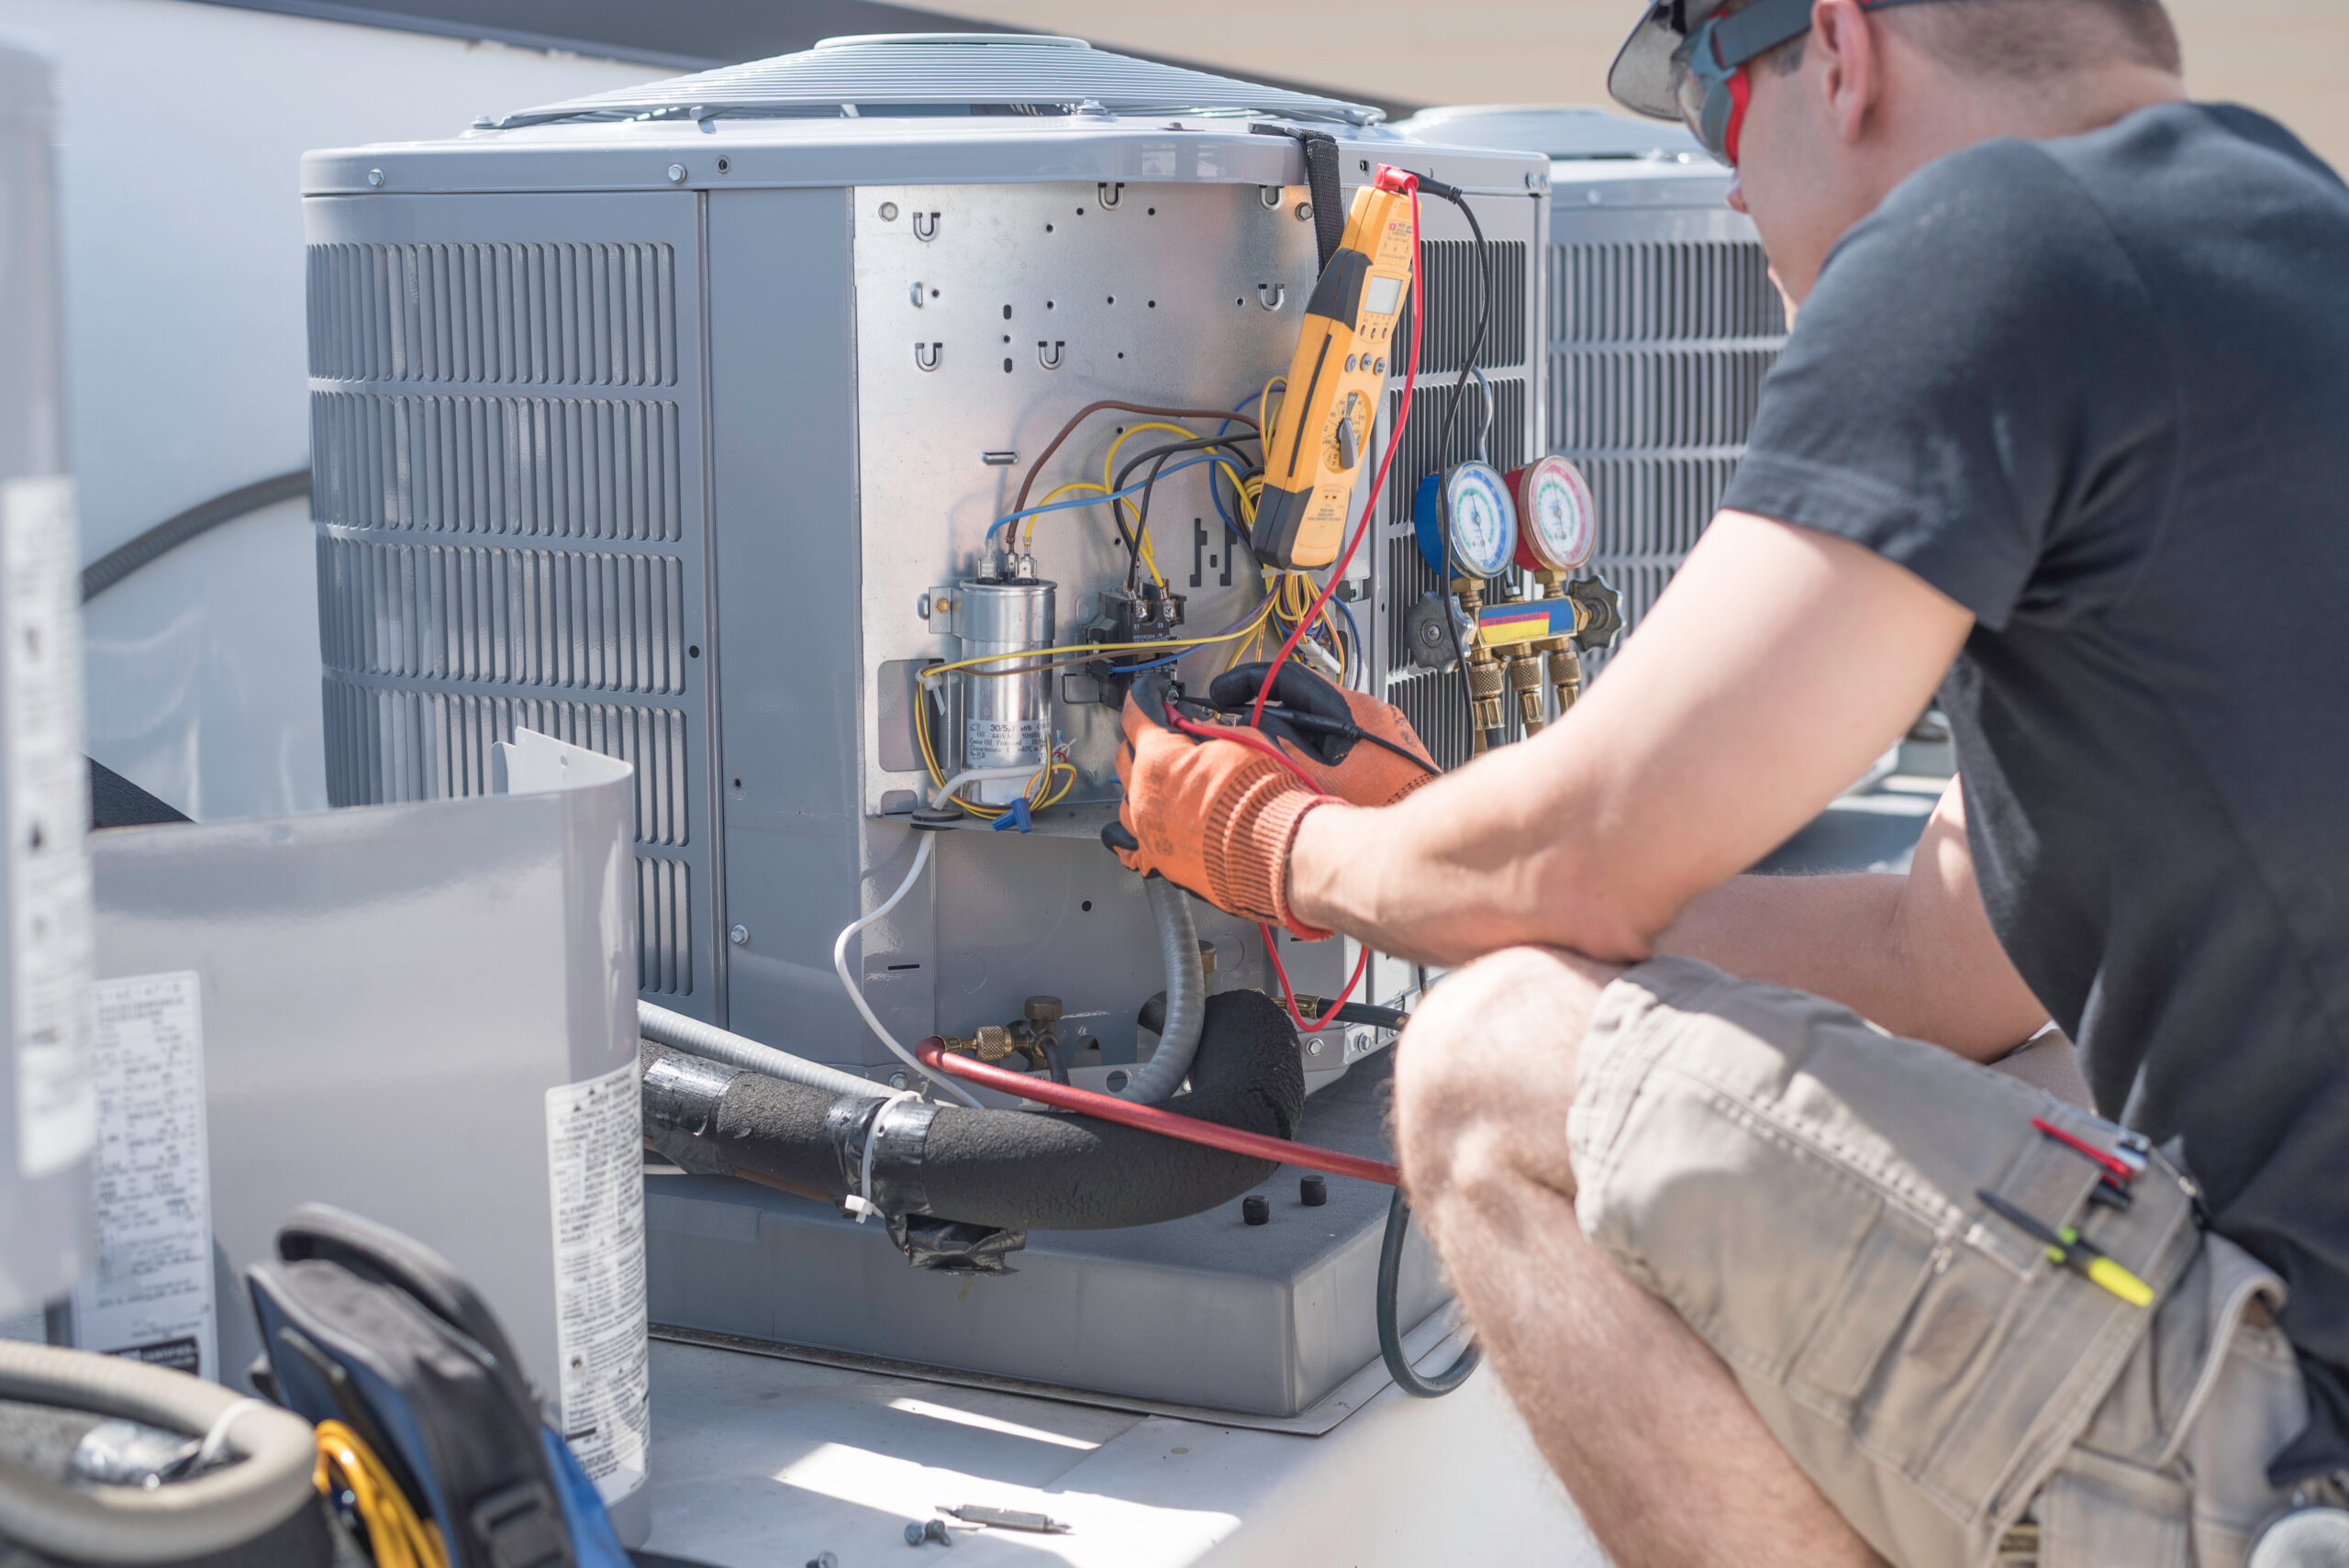 Schedule your seasonal tune-up with Air Comfort Solutions OKC - AC Repair